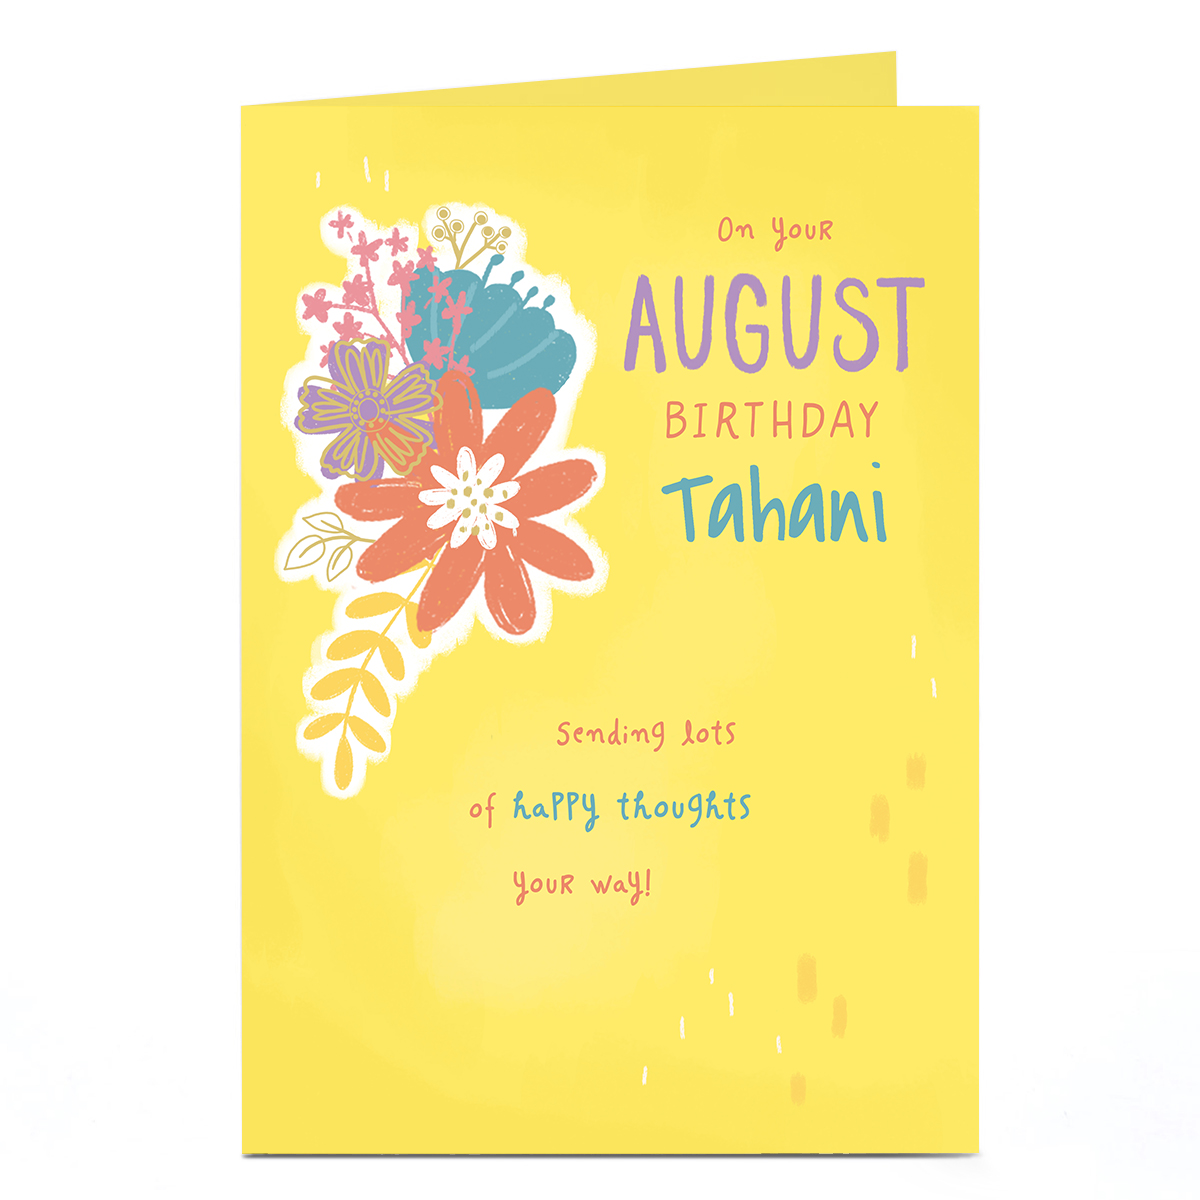 Personalised Birthday Card - August Happy Thoughts